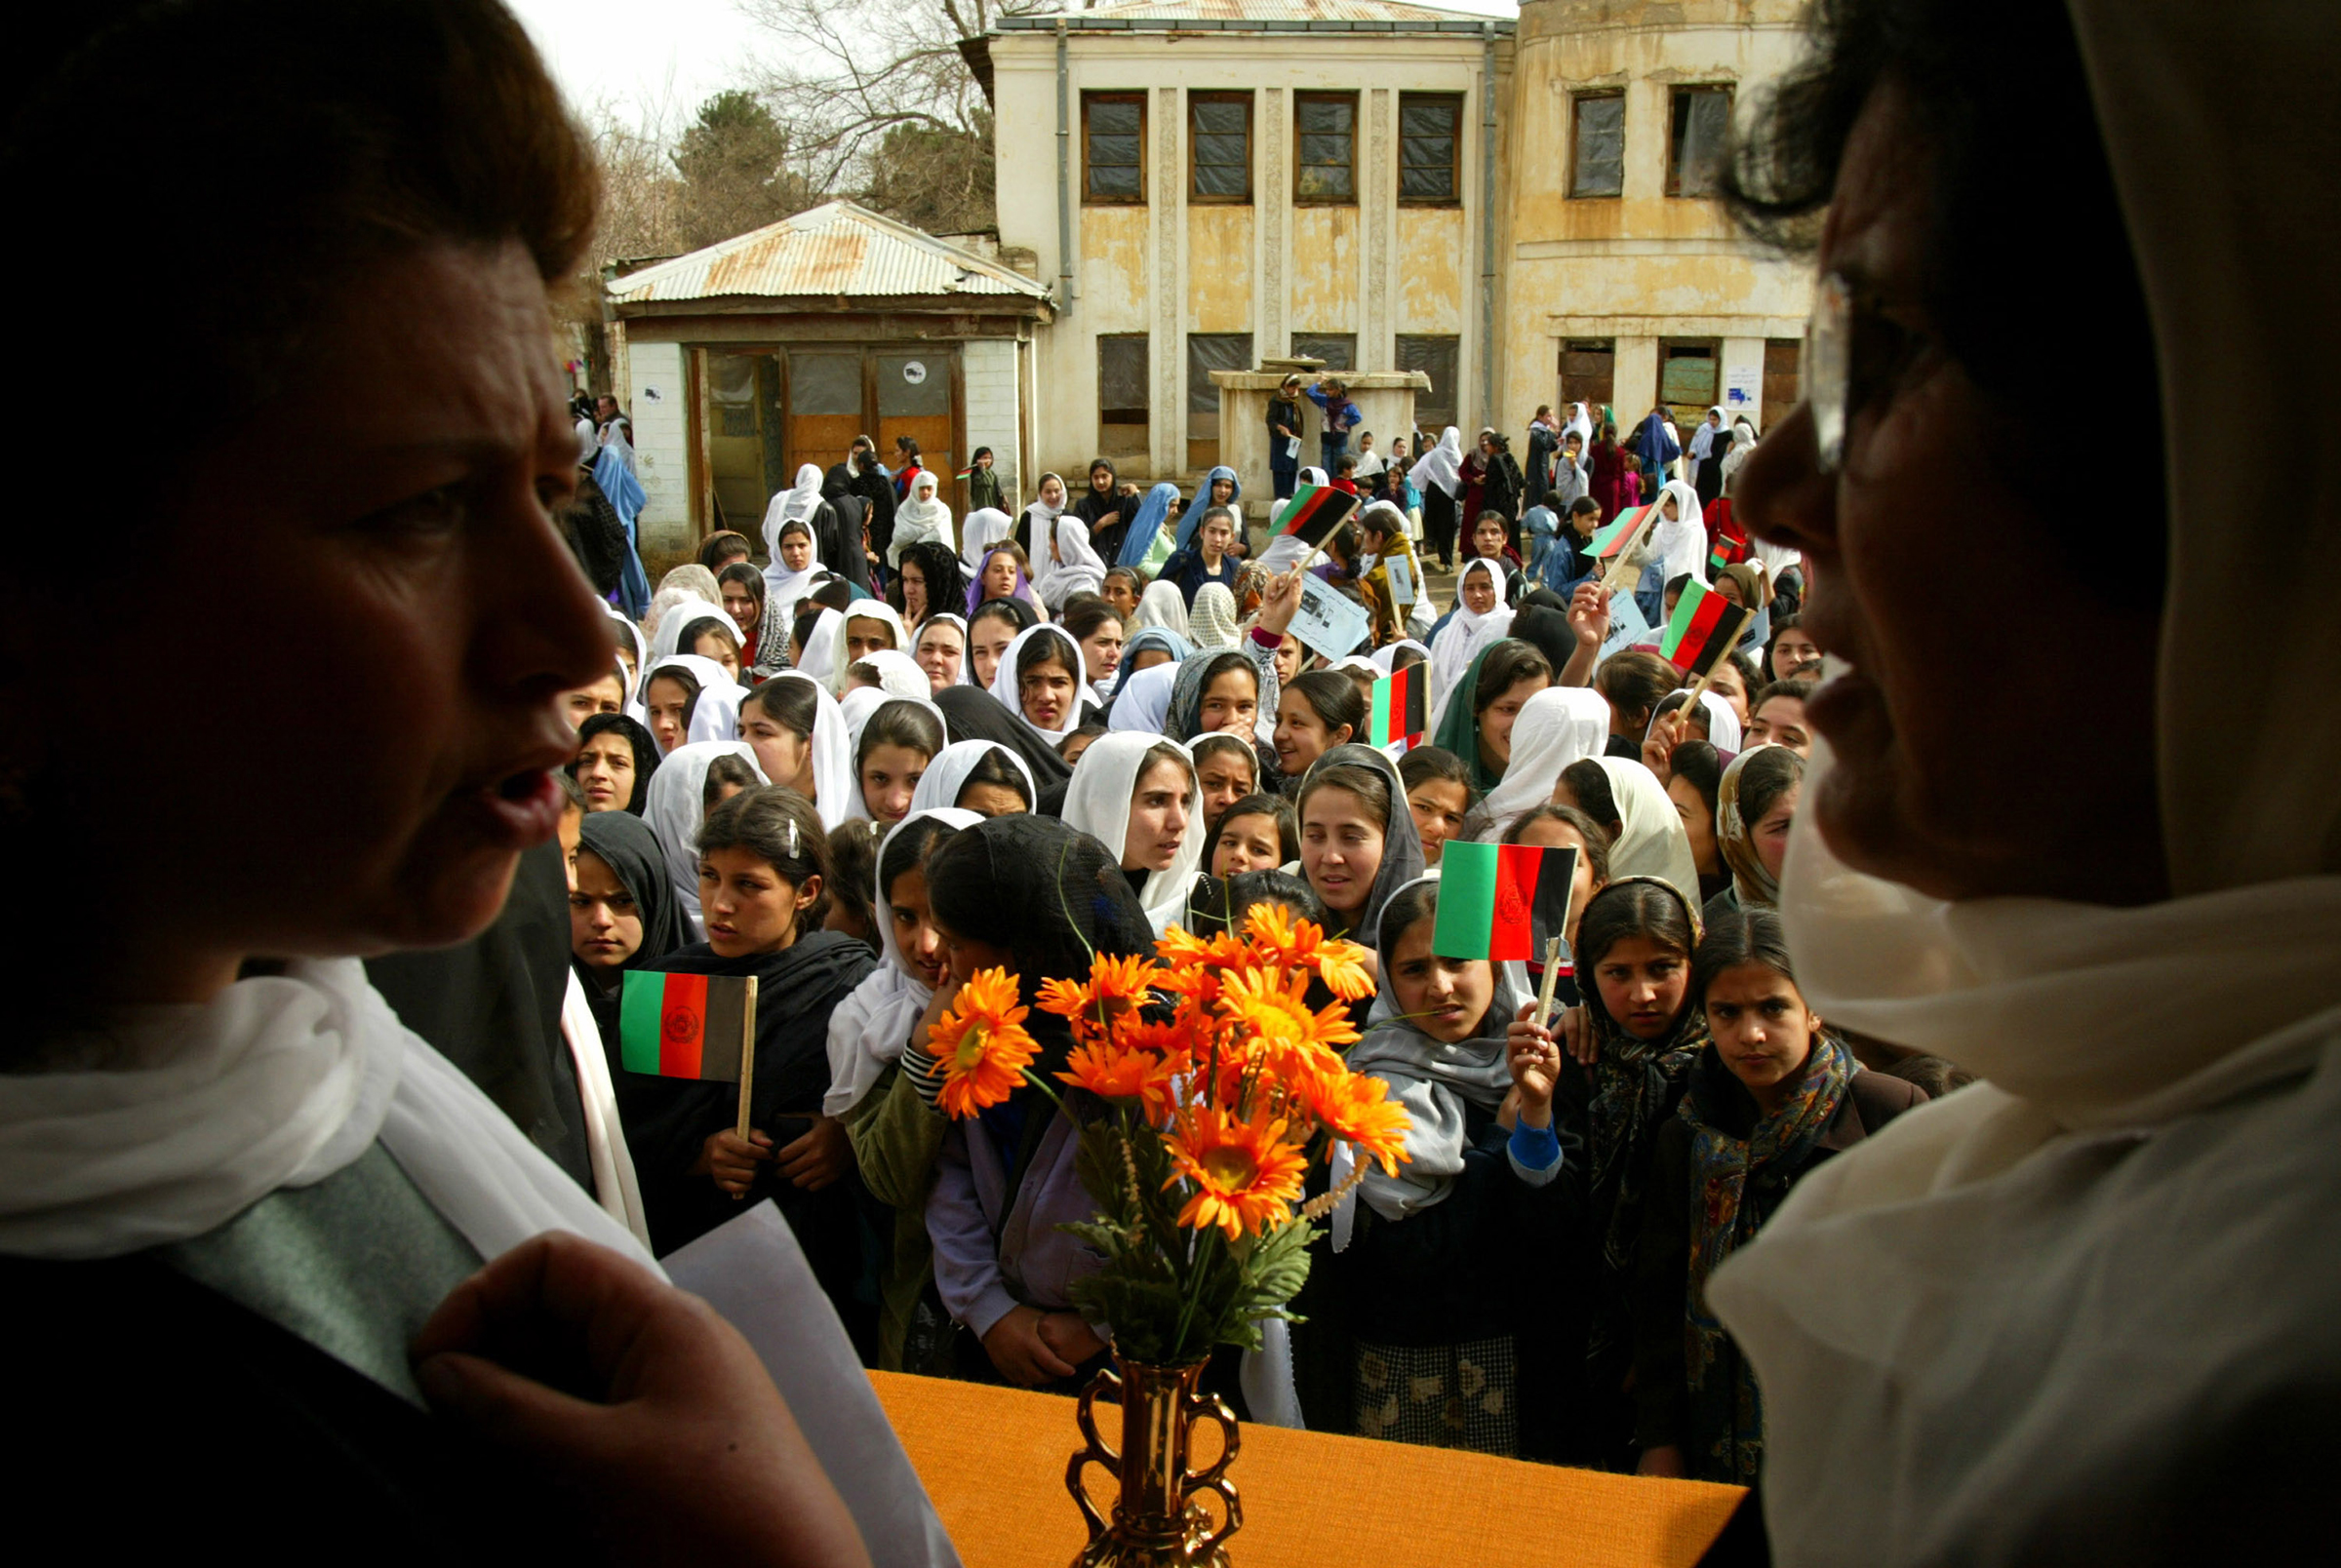 Teachers prepare to organize students into a group for the opening ceremonies on the first day of class at the Manoo Chera school in Kabul on March 23, 2002.